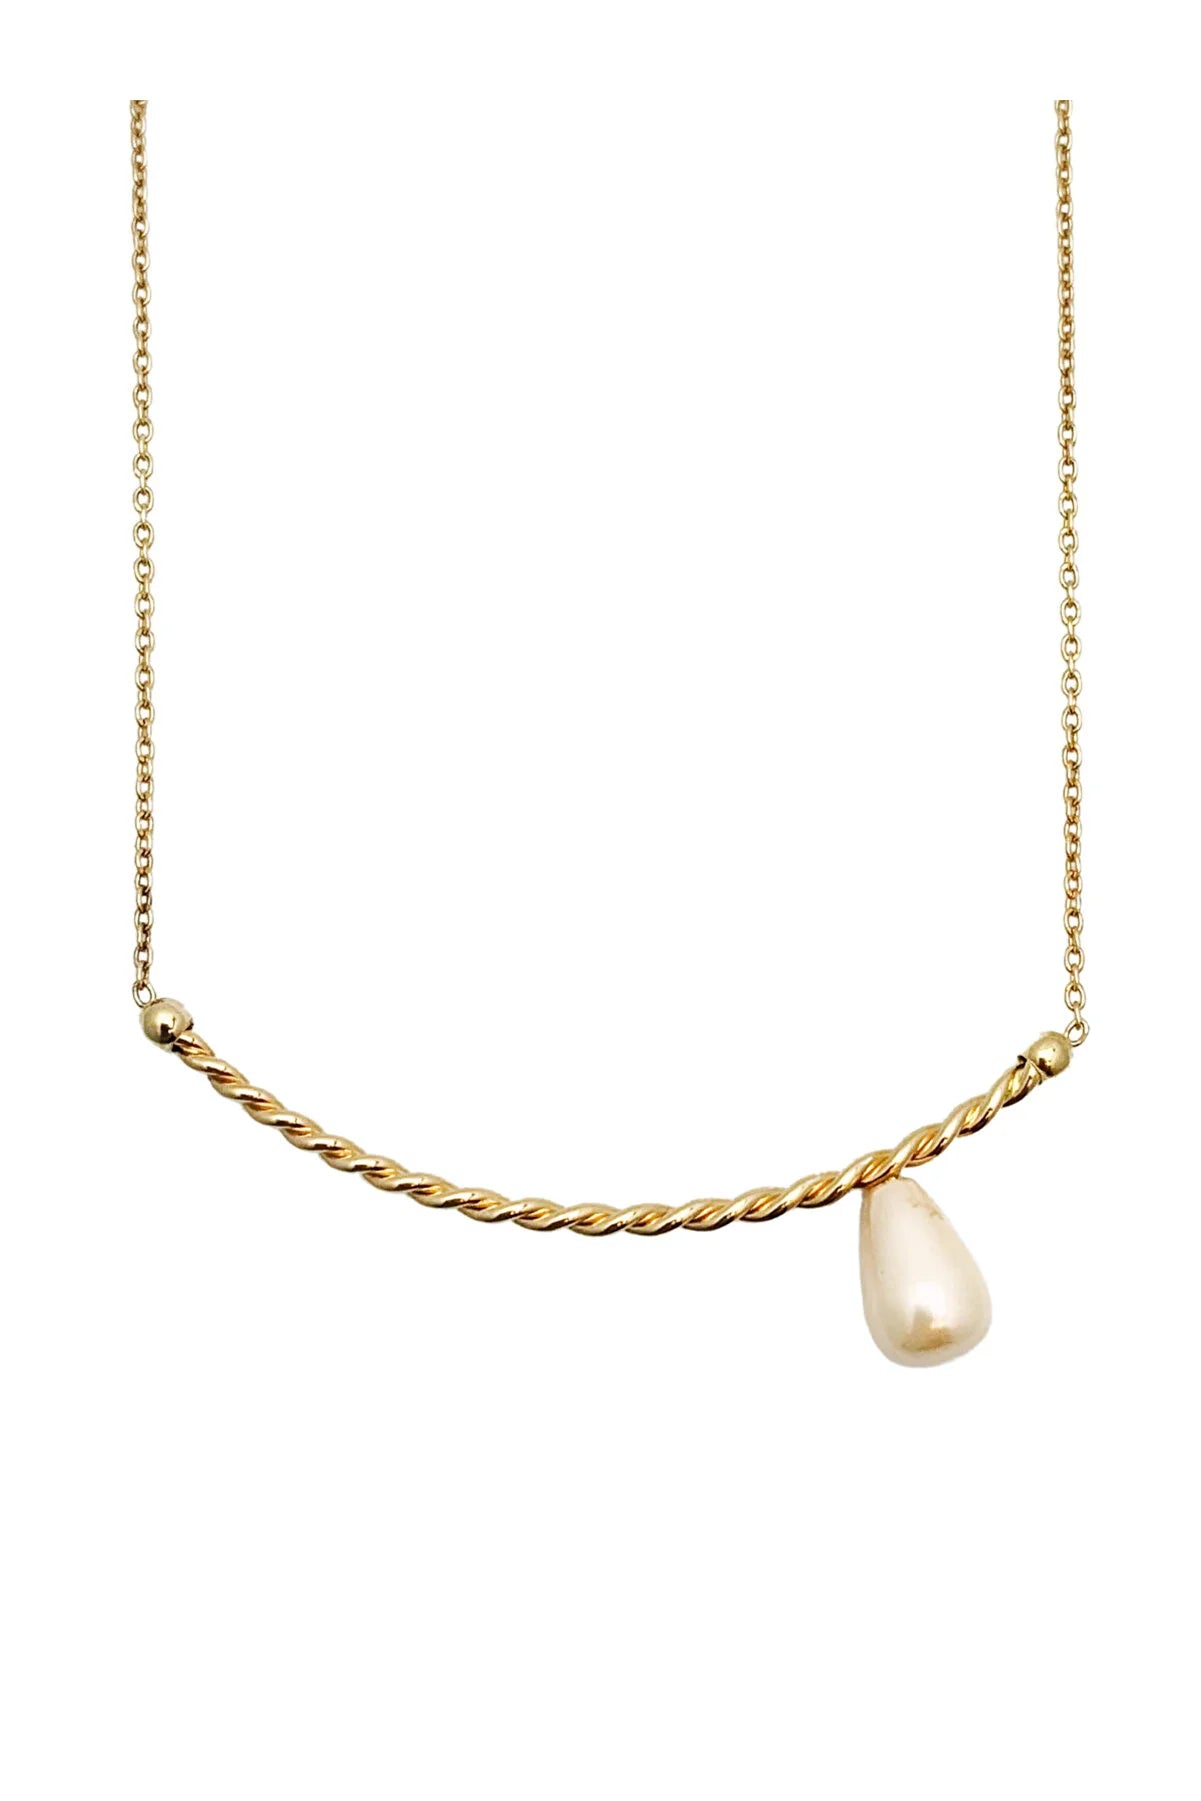 Heda Gold Pearl Necklace - heda collection